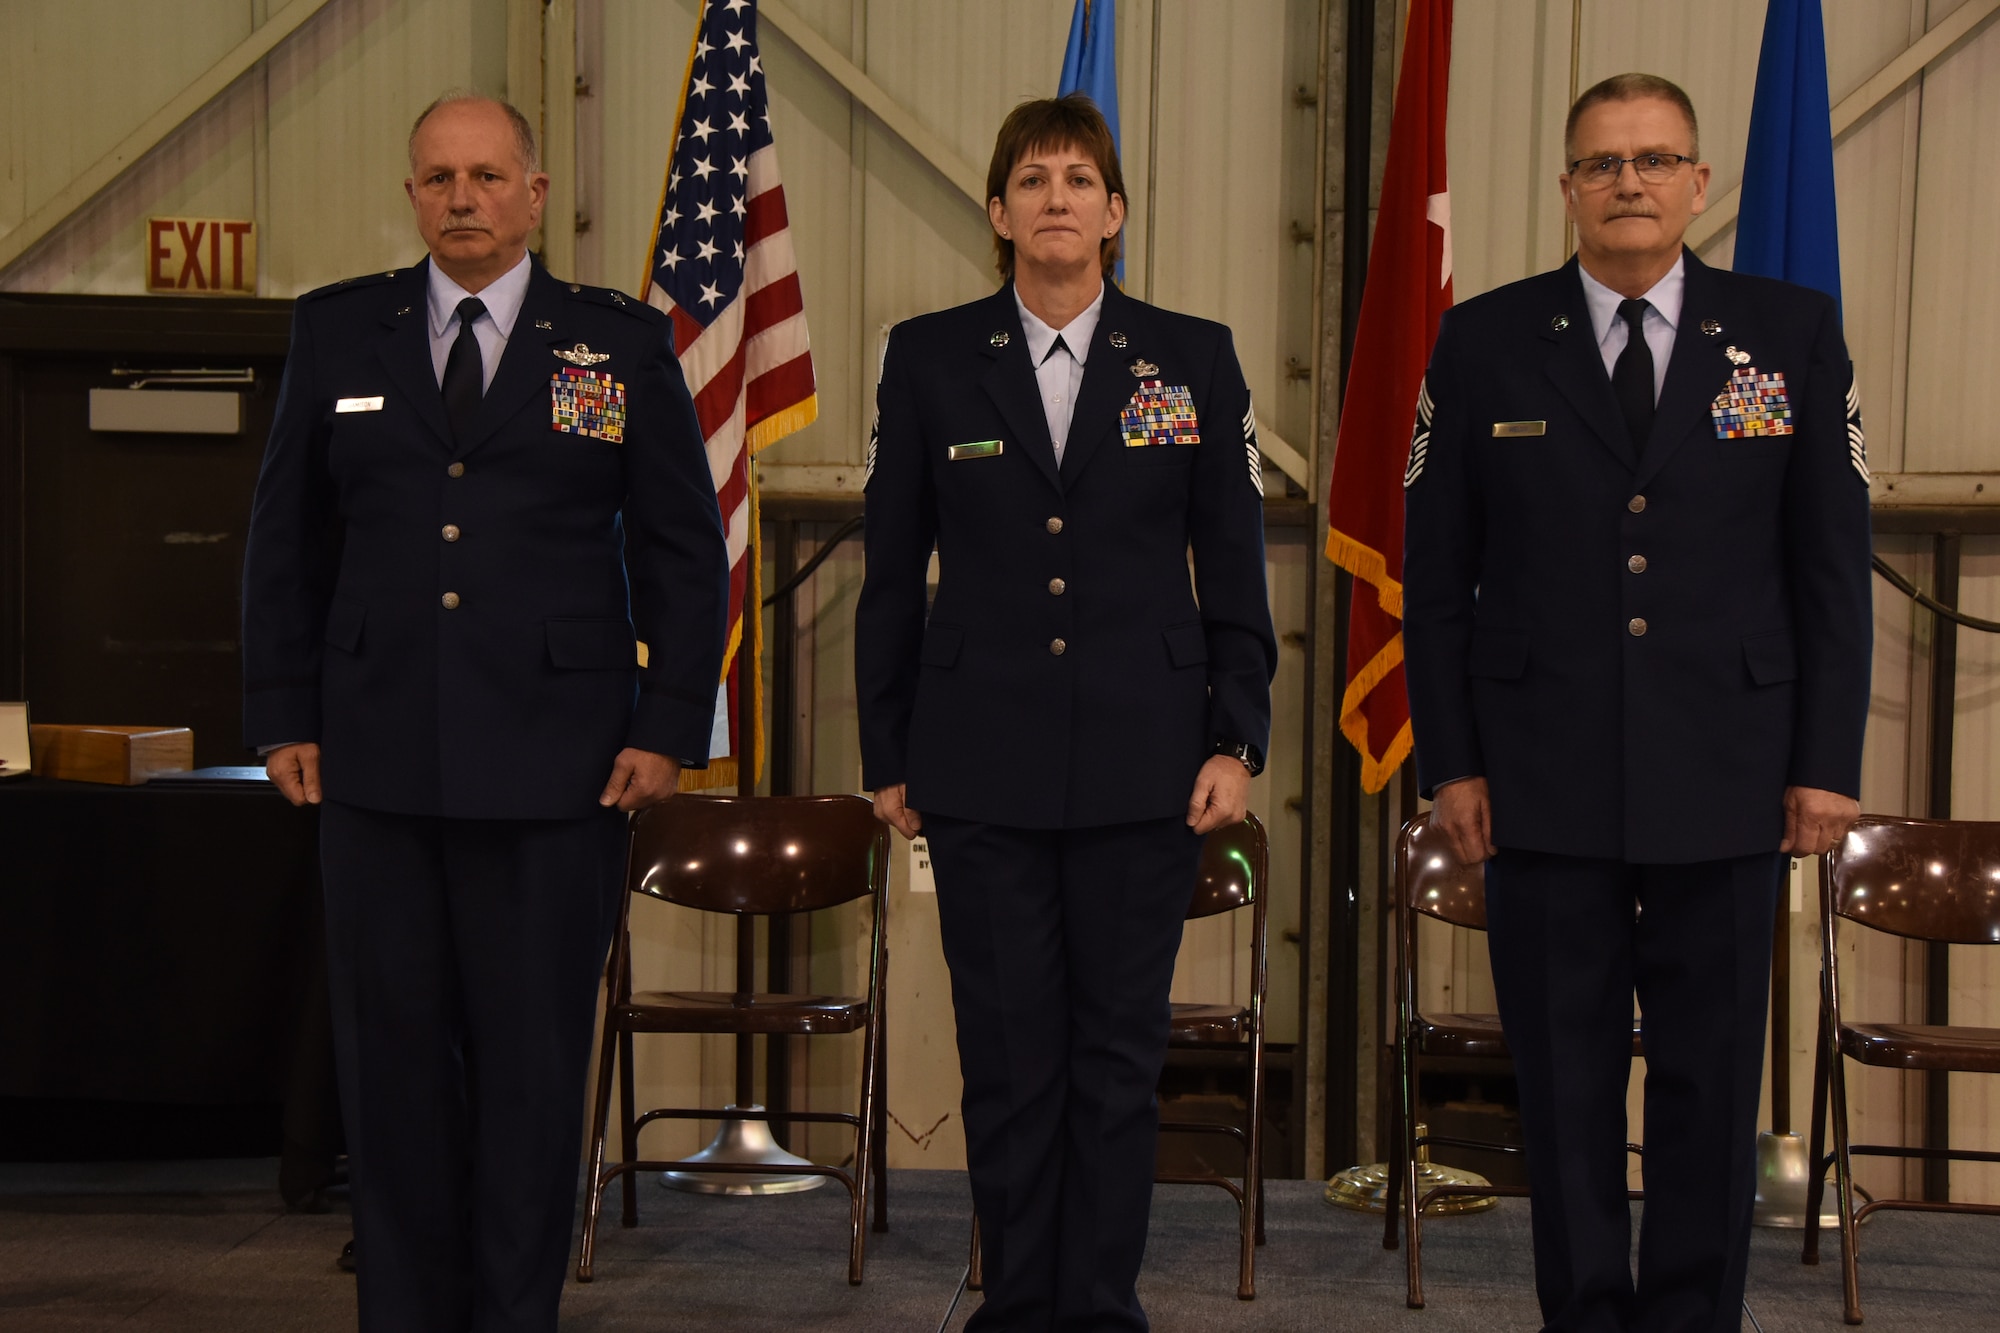 Brig. Gen. Matthew P. Jamison, Assistant Adjutant General for South Dakota Air National Guard, and retiring State Command Chief Master Sgt. James Welch stand at attention with incoming State Command Chief Master Sgt. Jean Gacke at Joe Foss Field, S.D. March 5, 2016. A ceremony was held to recognize the change of responsibility for these individuals. (U.S. Air National Guard photo by Staff Sgt. Luke Olson/Released)